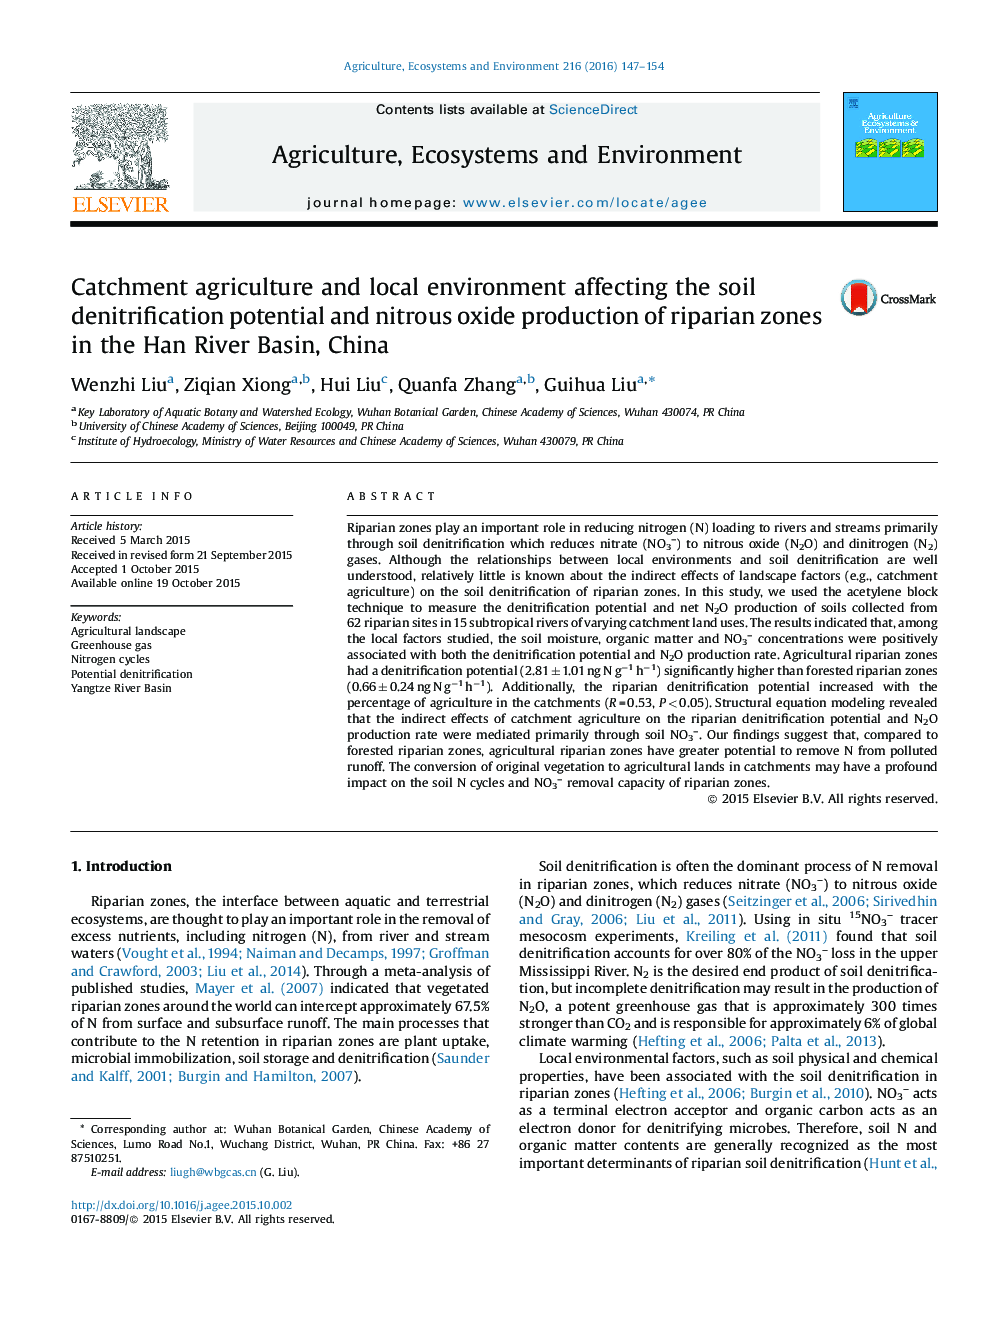 Catchment agriculture and local environment affecting the soil denitrification potential and nitrous oxide production of riparian zones in the Han River Basin, China